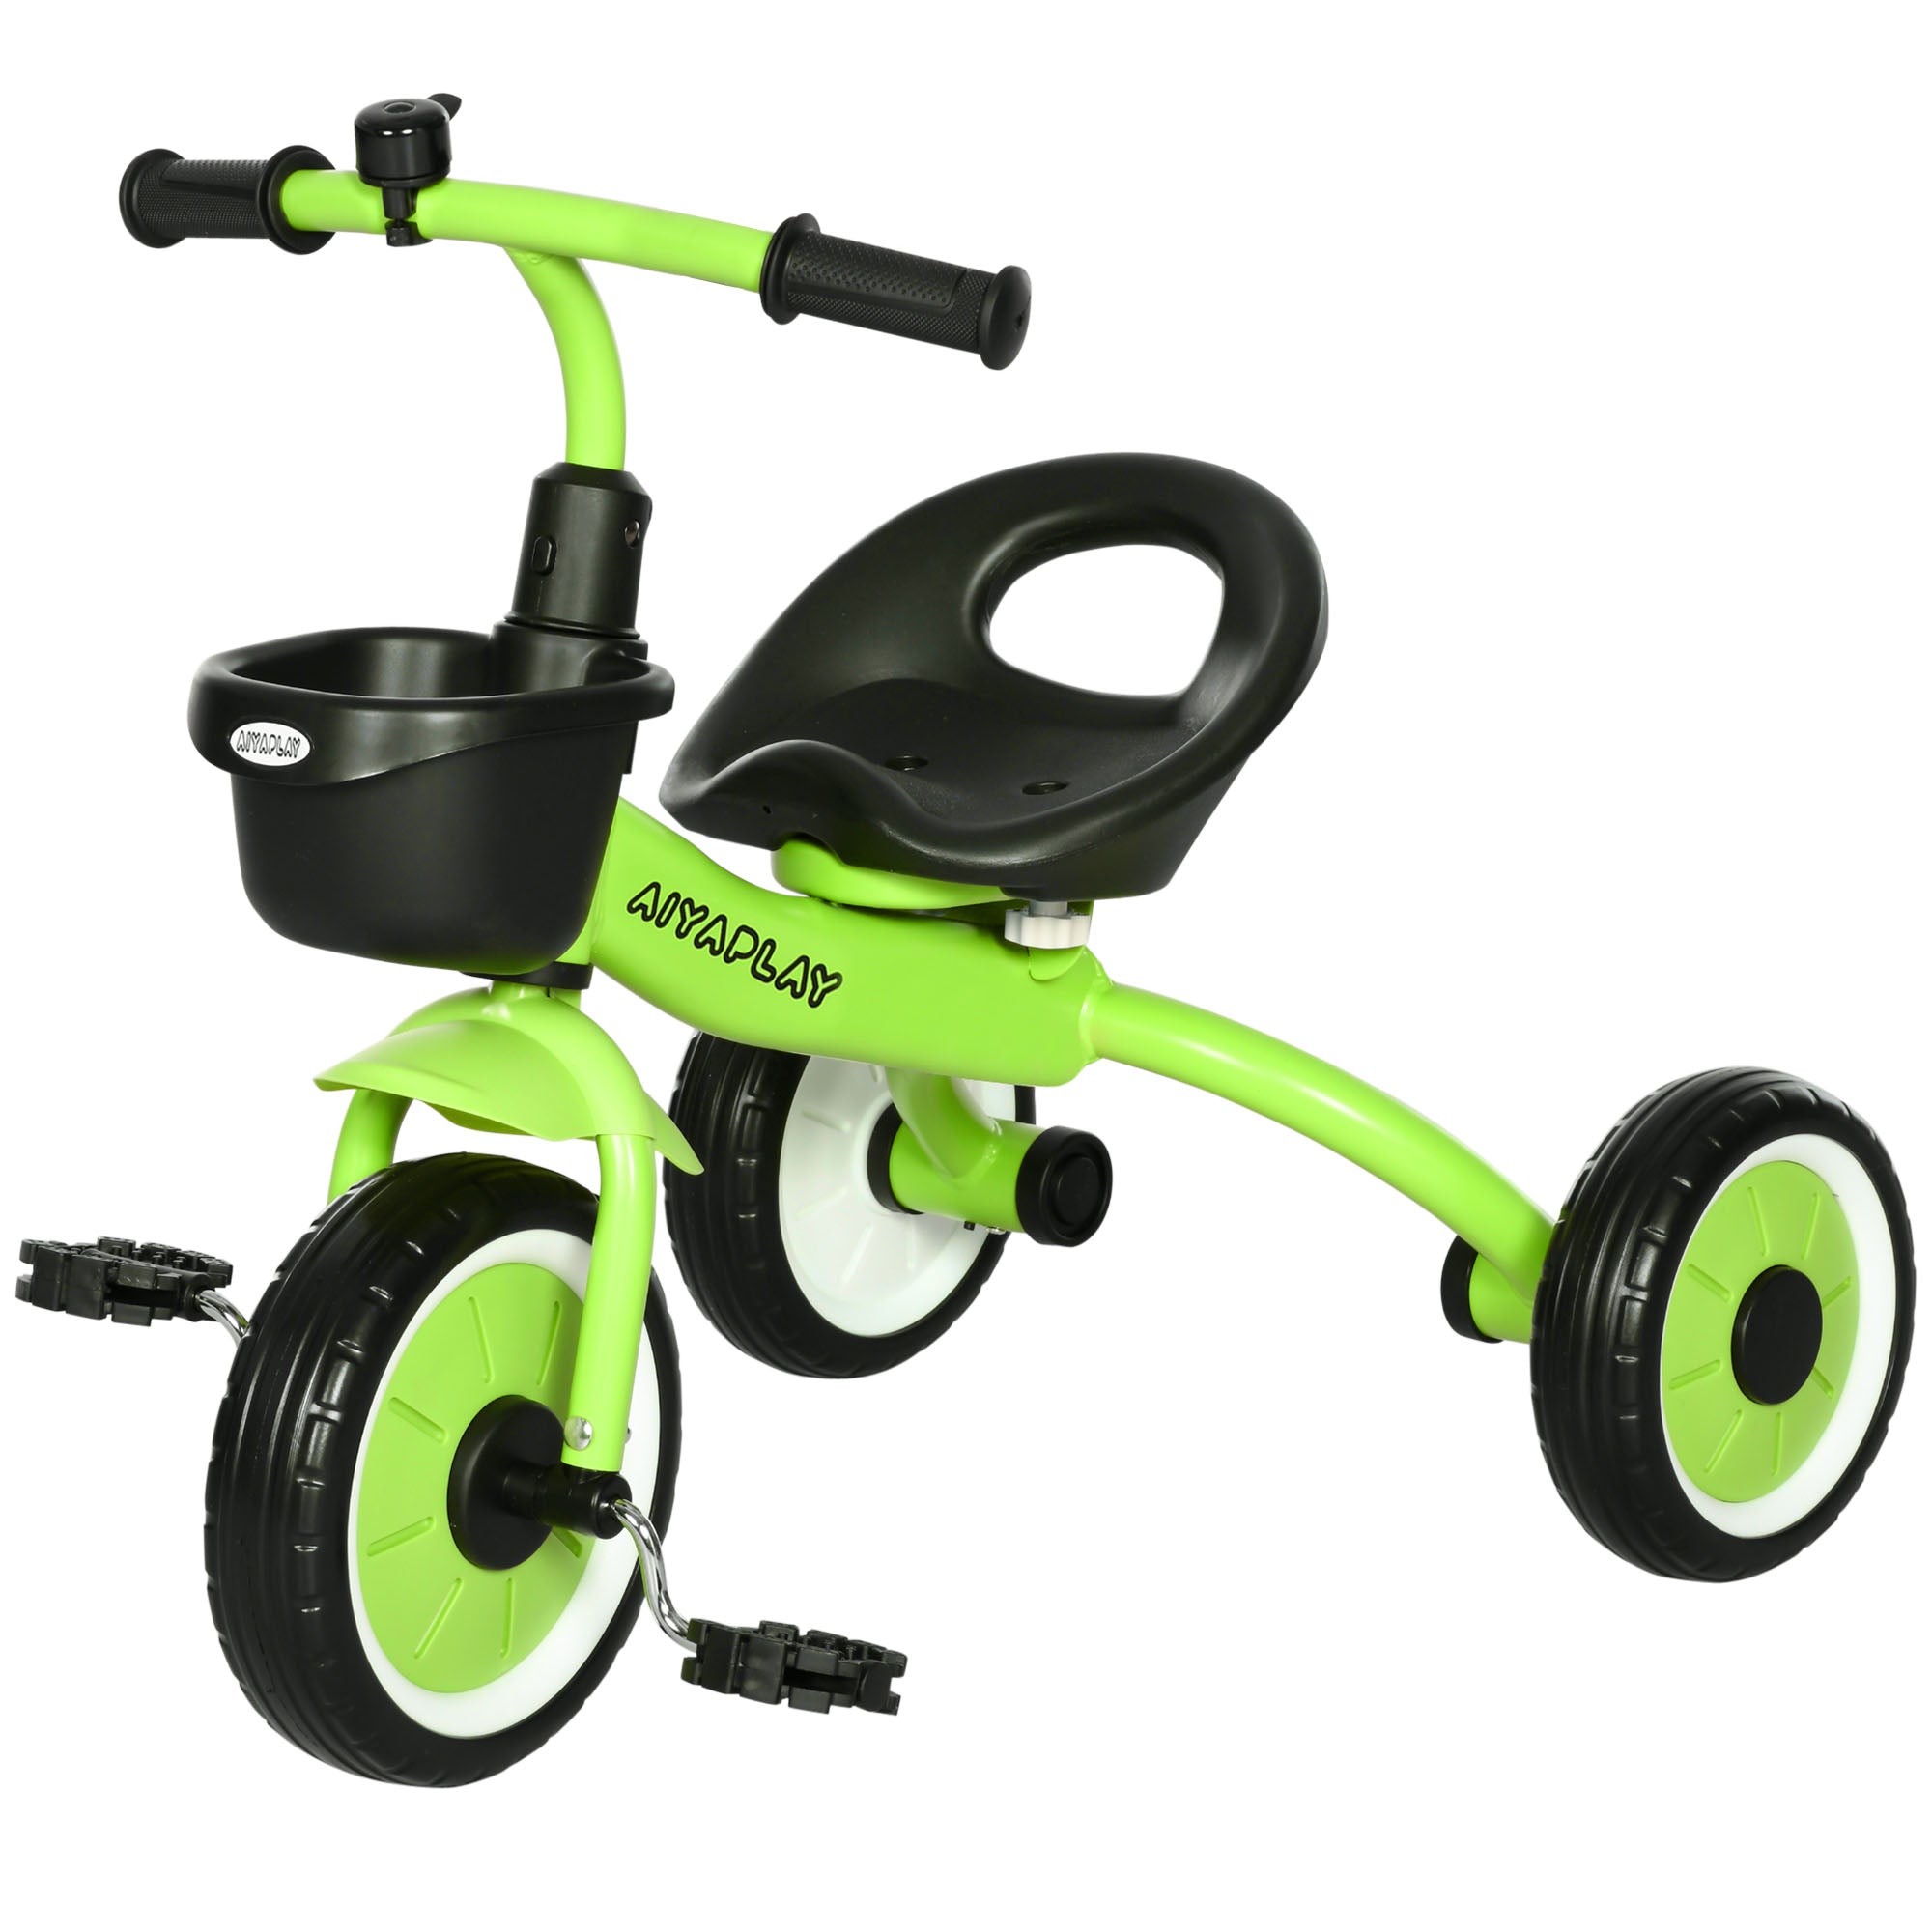 AIYAPLAY Kids Trike, Tricycle, with Adjustable Seat, Basket, Bell, for Ages 2-5 Years - Green